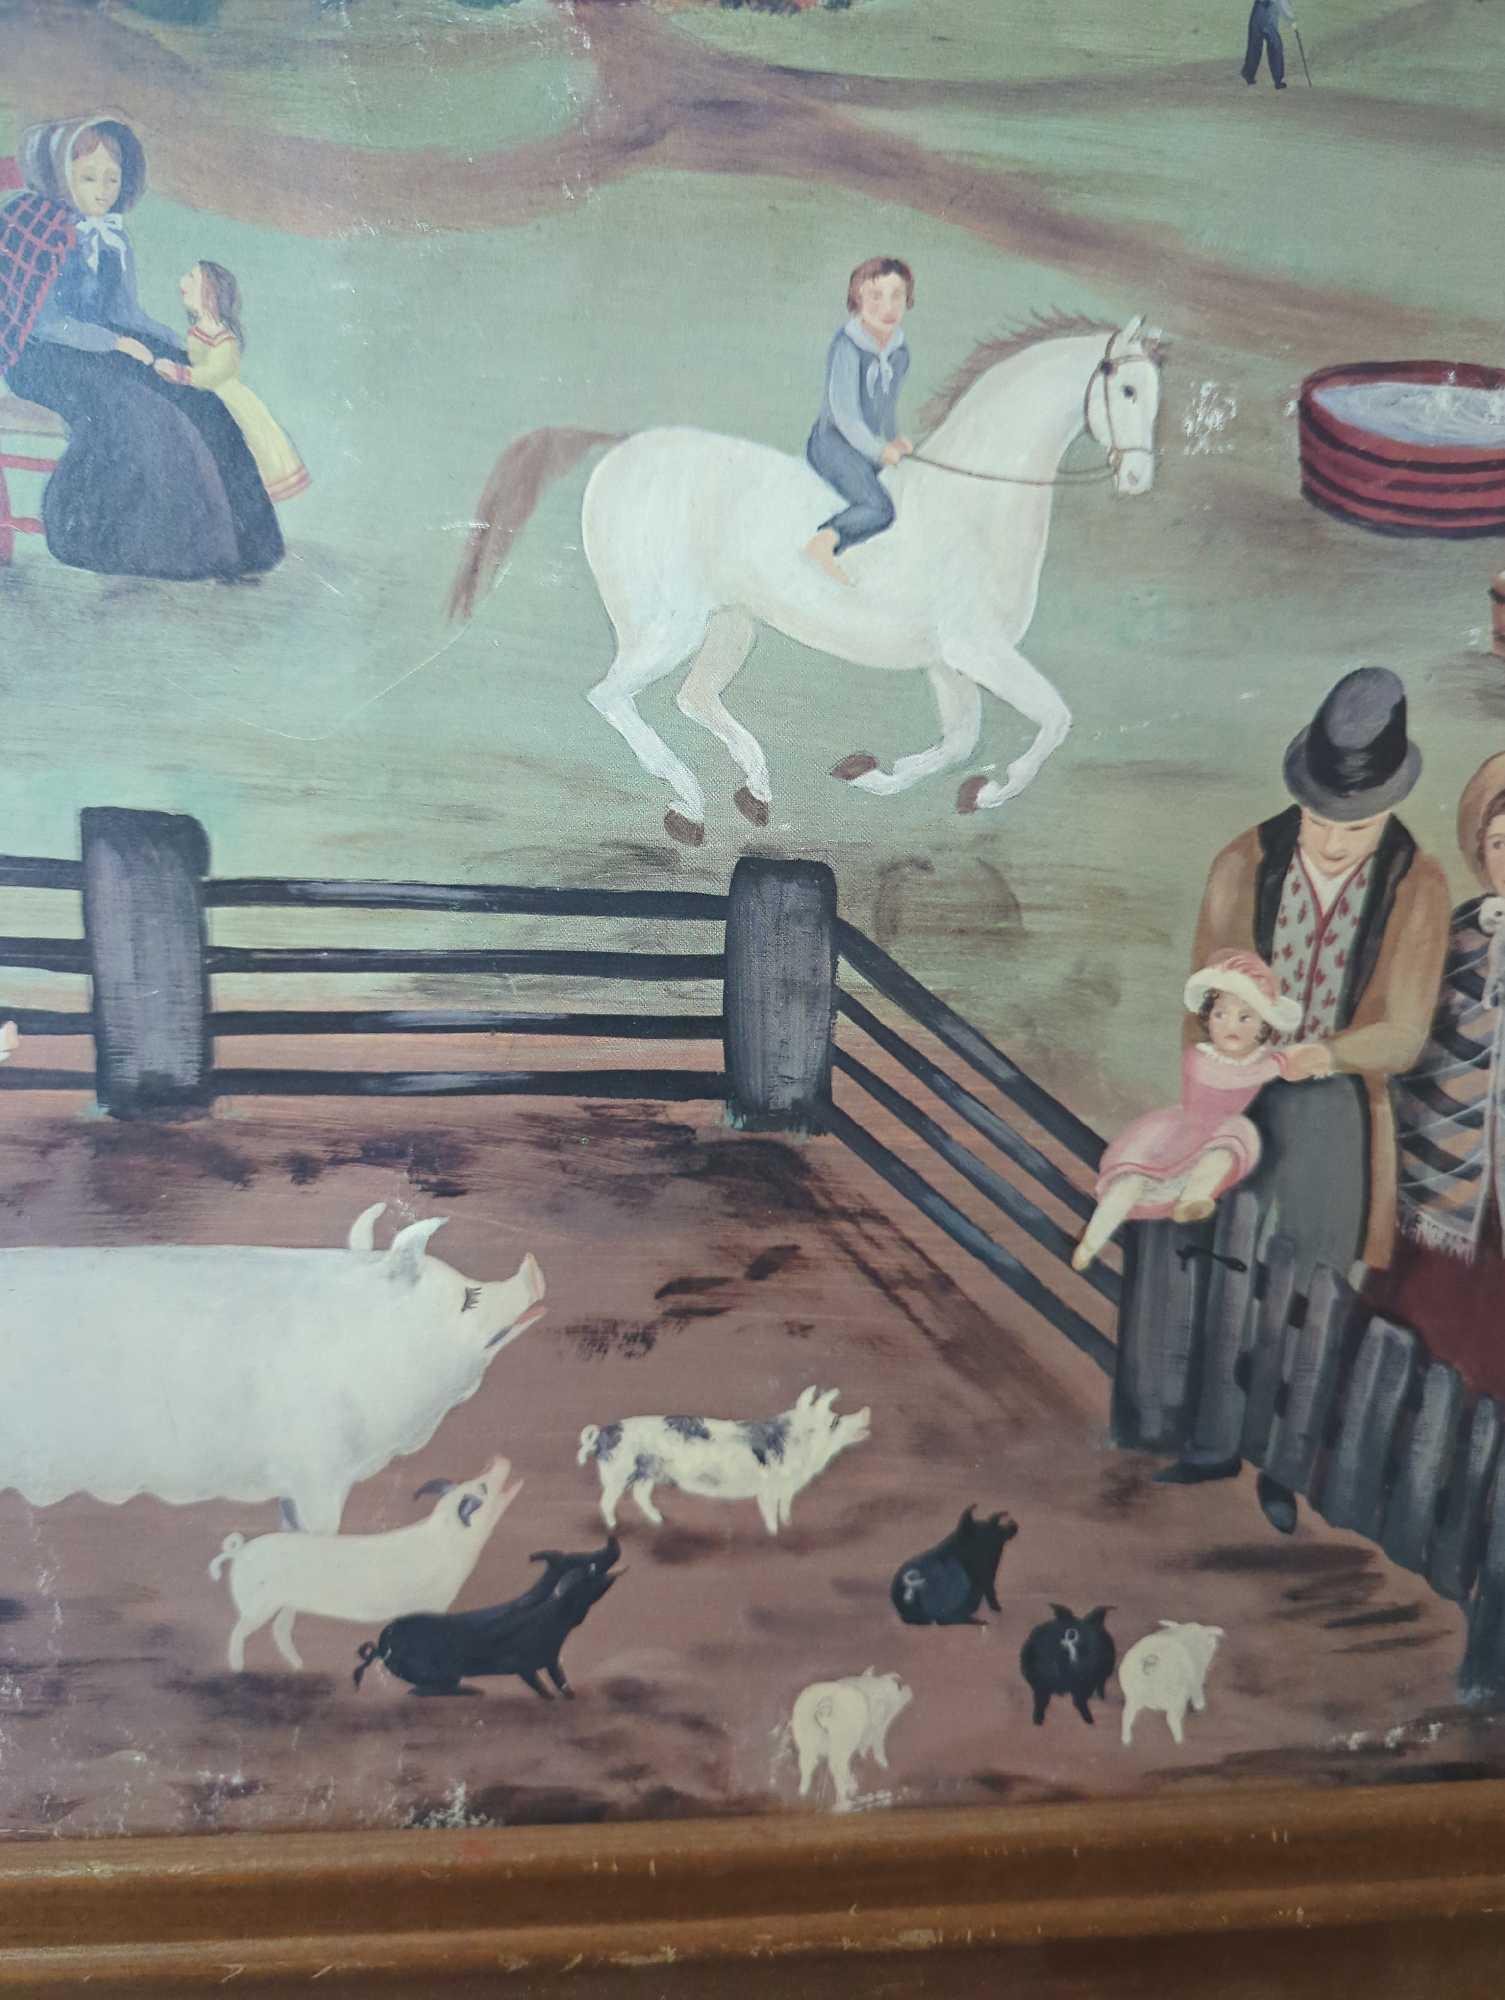 Framed Print of "Down on the Farm" by Martha Cahoon (1980), Approximate Dimensions - 28" x 22",